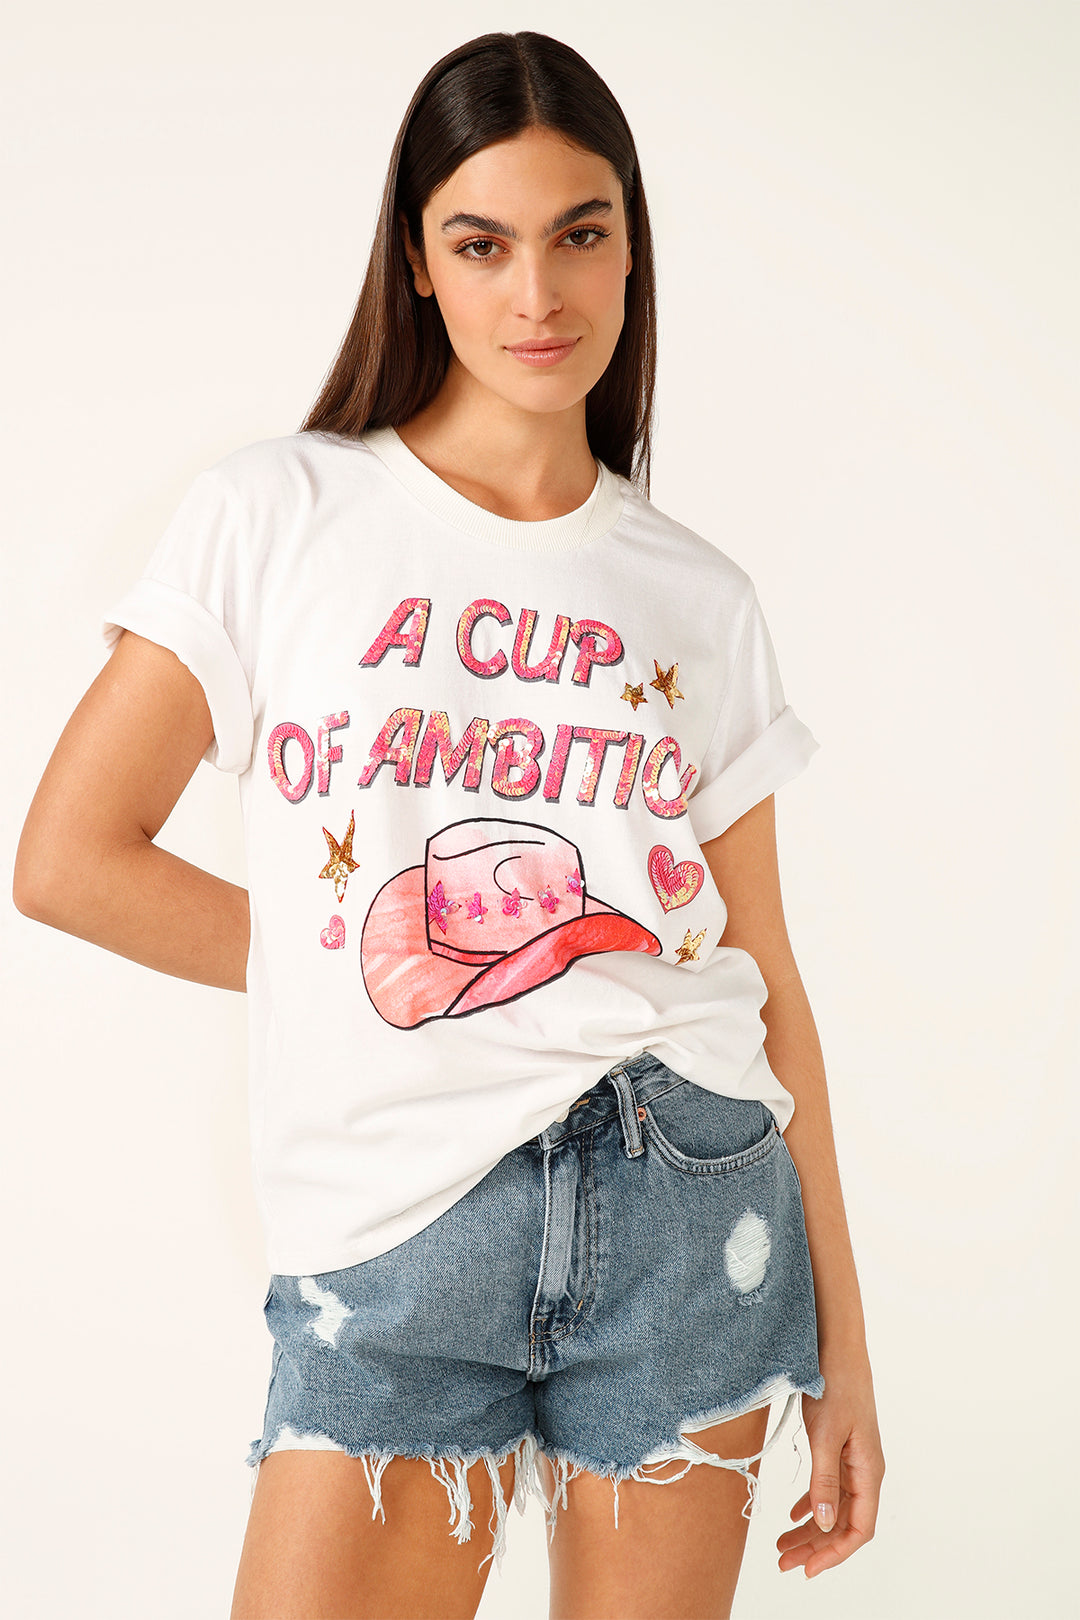 A Cup of Ambition Tee